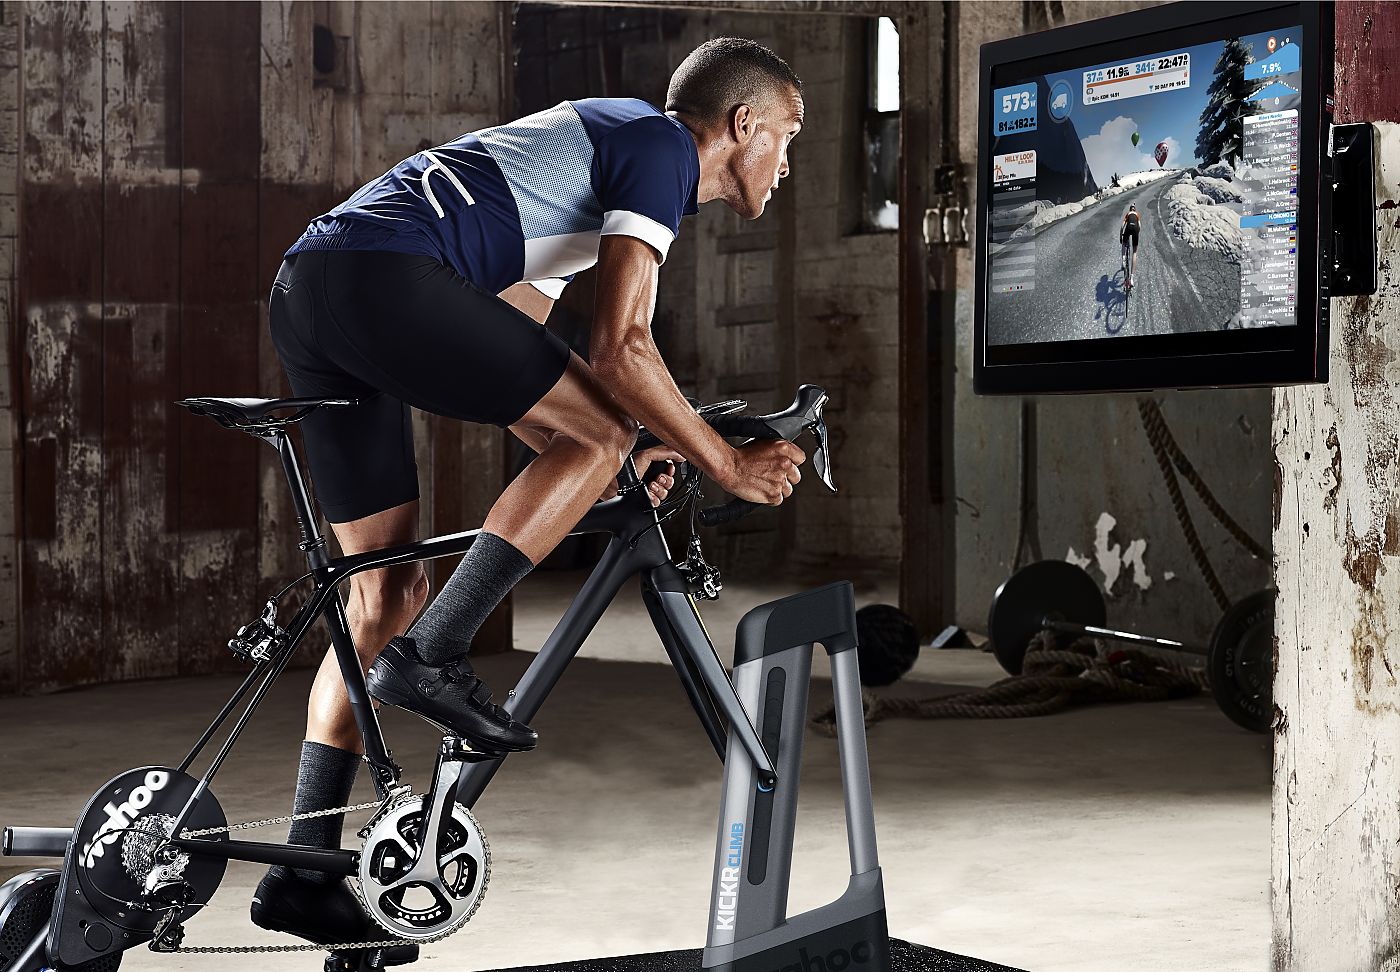 Wahoo Fitness shows climb simulator for KICKR trainers | Bicycle